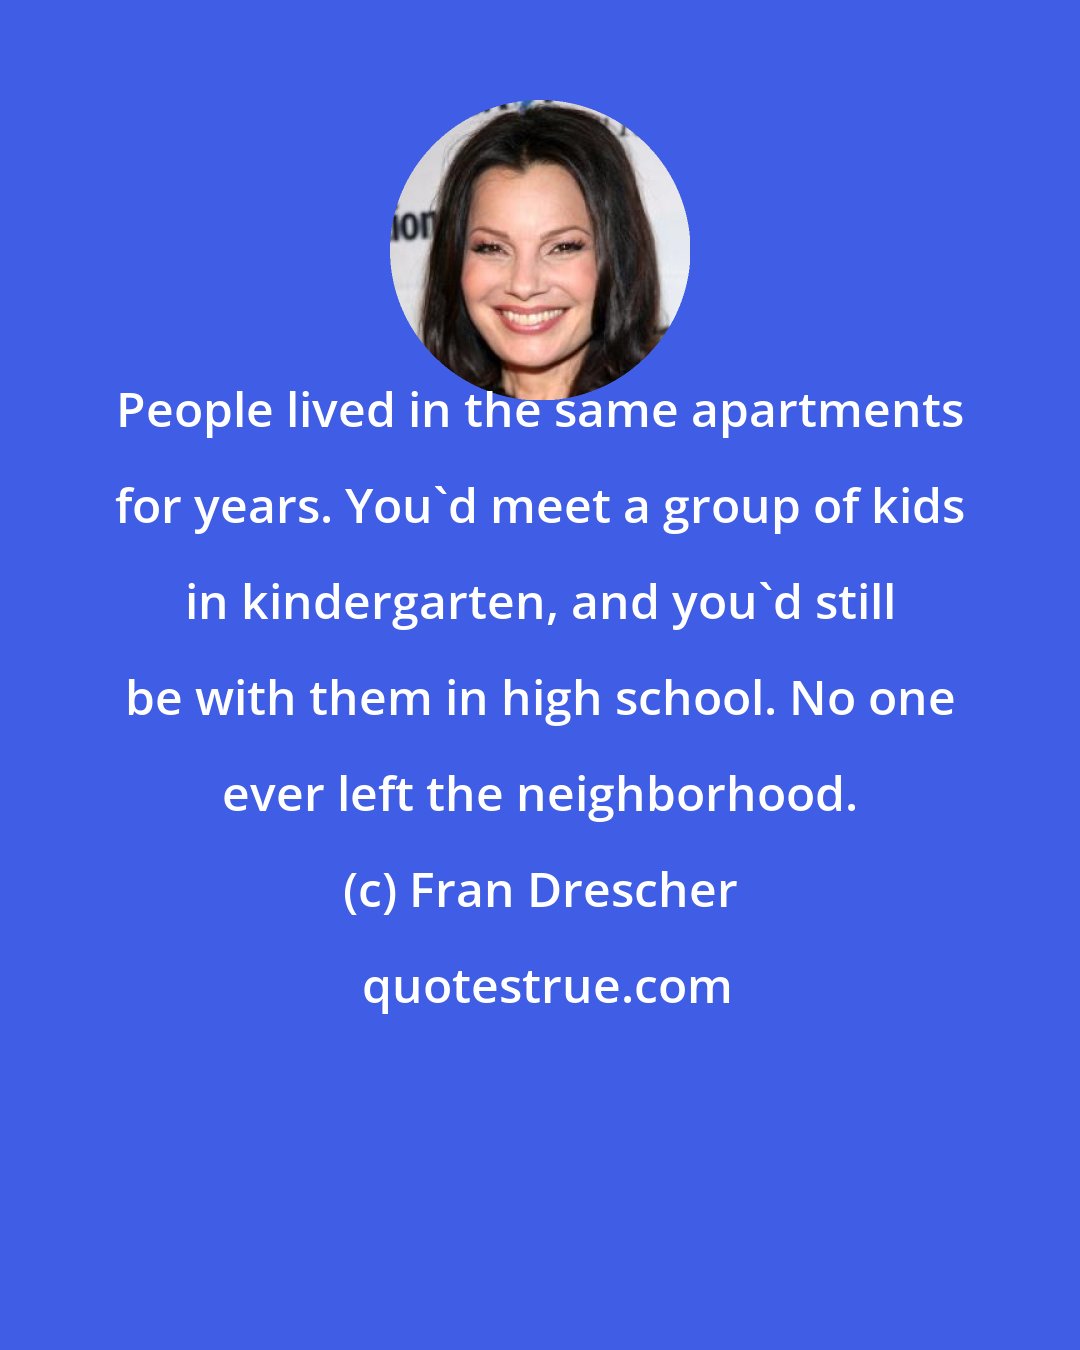 Fran Drescher: People lived in the same apartments for years. You'd meet a group of kids in kindergarten, and you'd still be with them in high school. No one ever left the neighborhood.